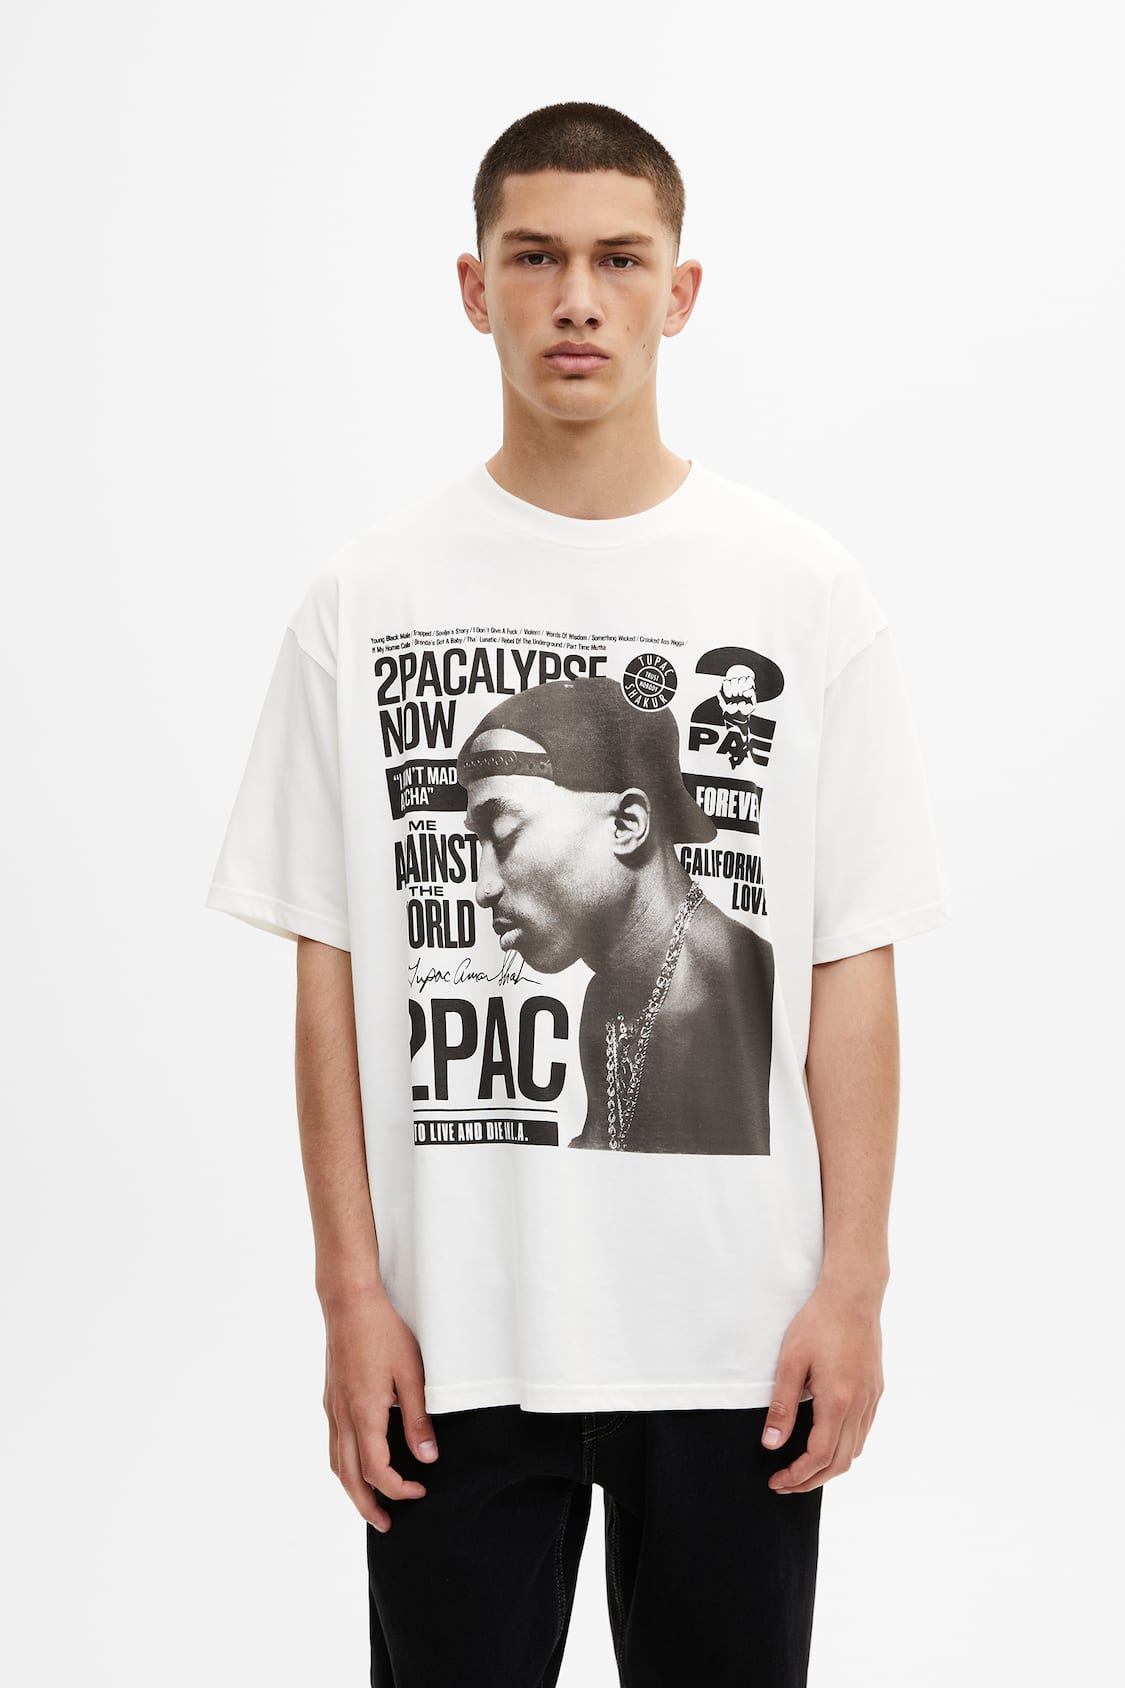 Labe grøntsager Tryk ned Oversize T-shirt with contrast Tupac graphic - pull&bear